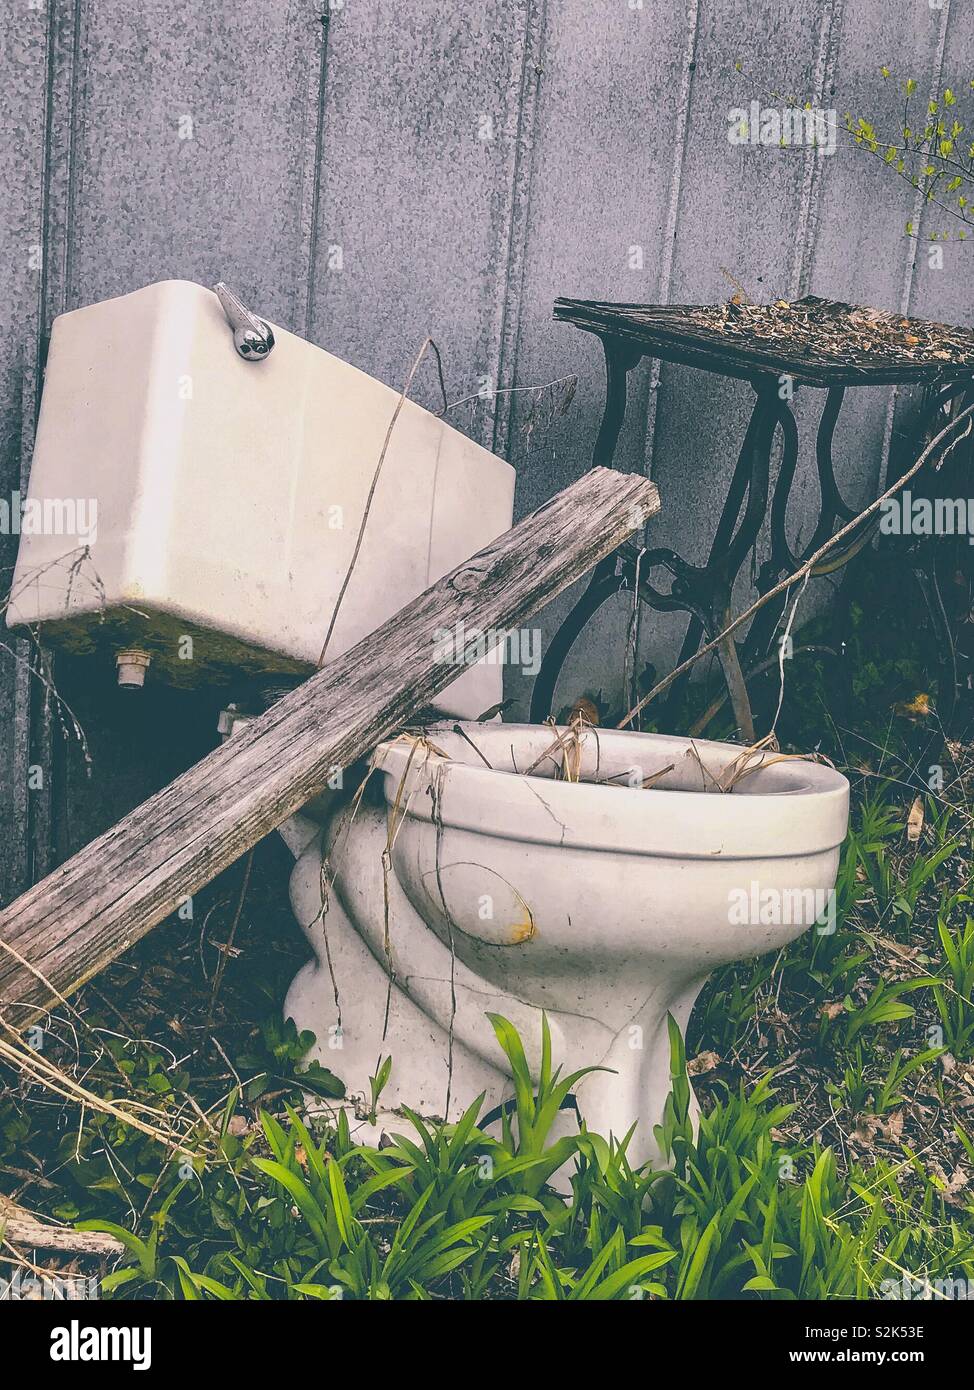 Matt photo of old toilet and vintage sewing machine base beside metal shed wall Stock Photo